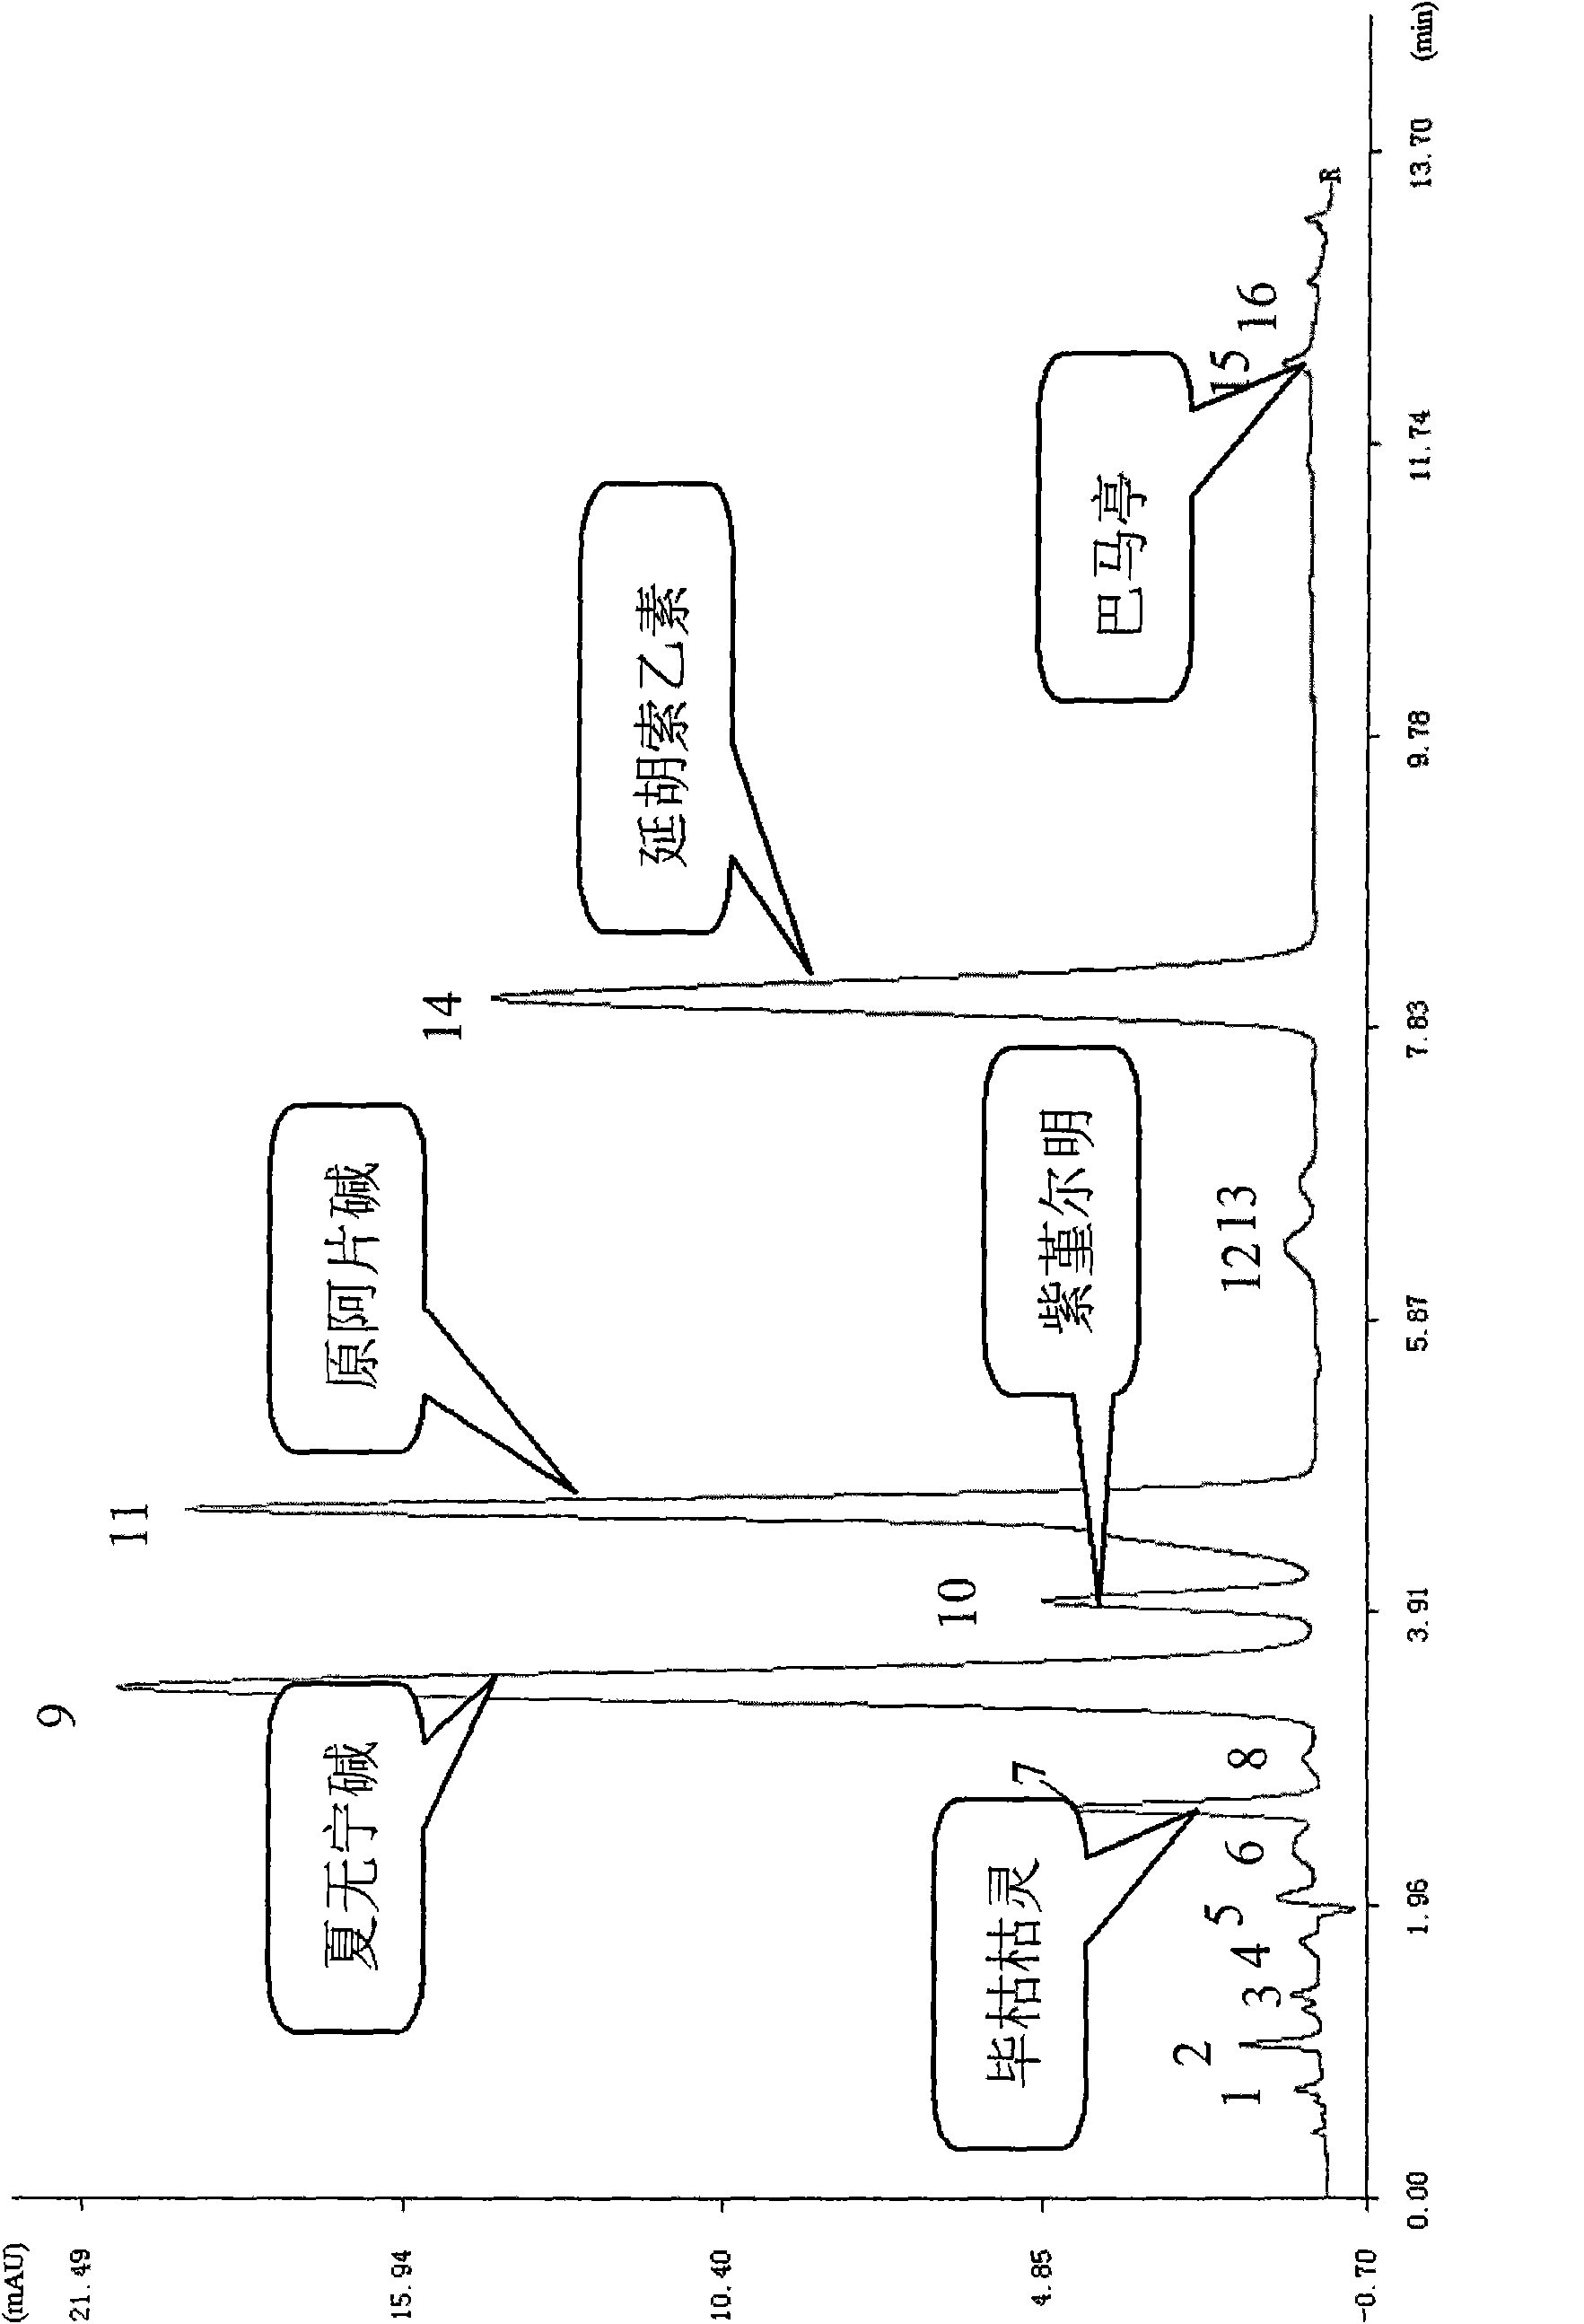 Method for determining decumbent corydalis tuber total alkaloid extractive content with UFLC and method for establishing UFLC finger print thereof